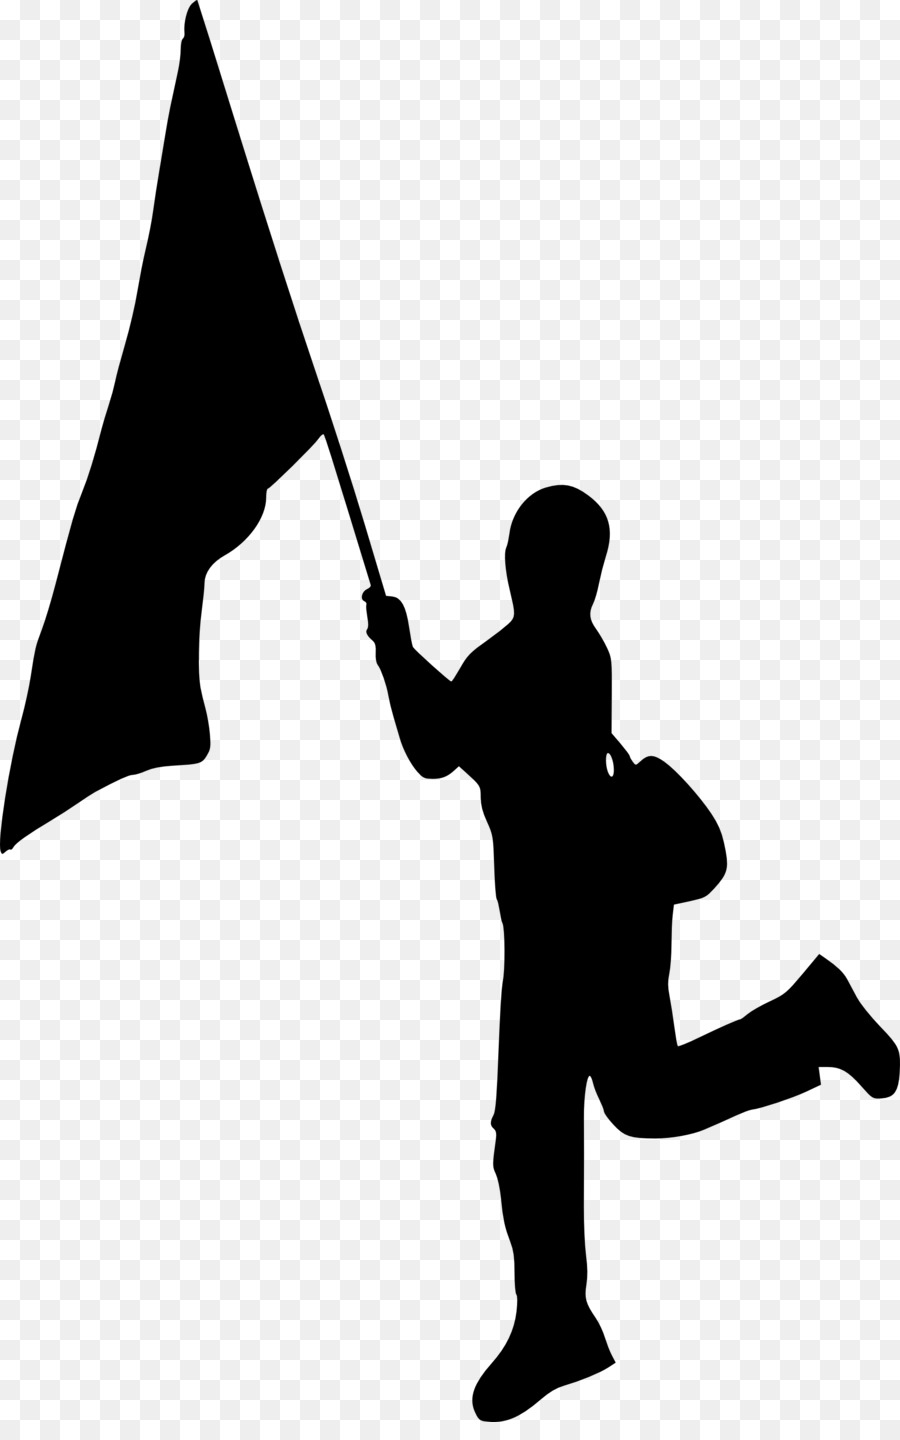 Silhouette Person Flag Photography - silhouete png download - 2059*3253 - Free Transparent Silhouette png Download.